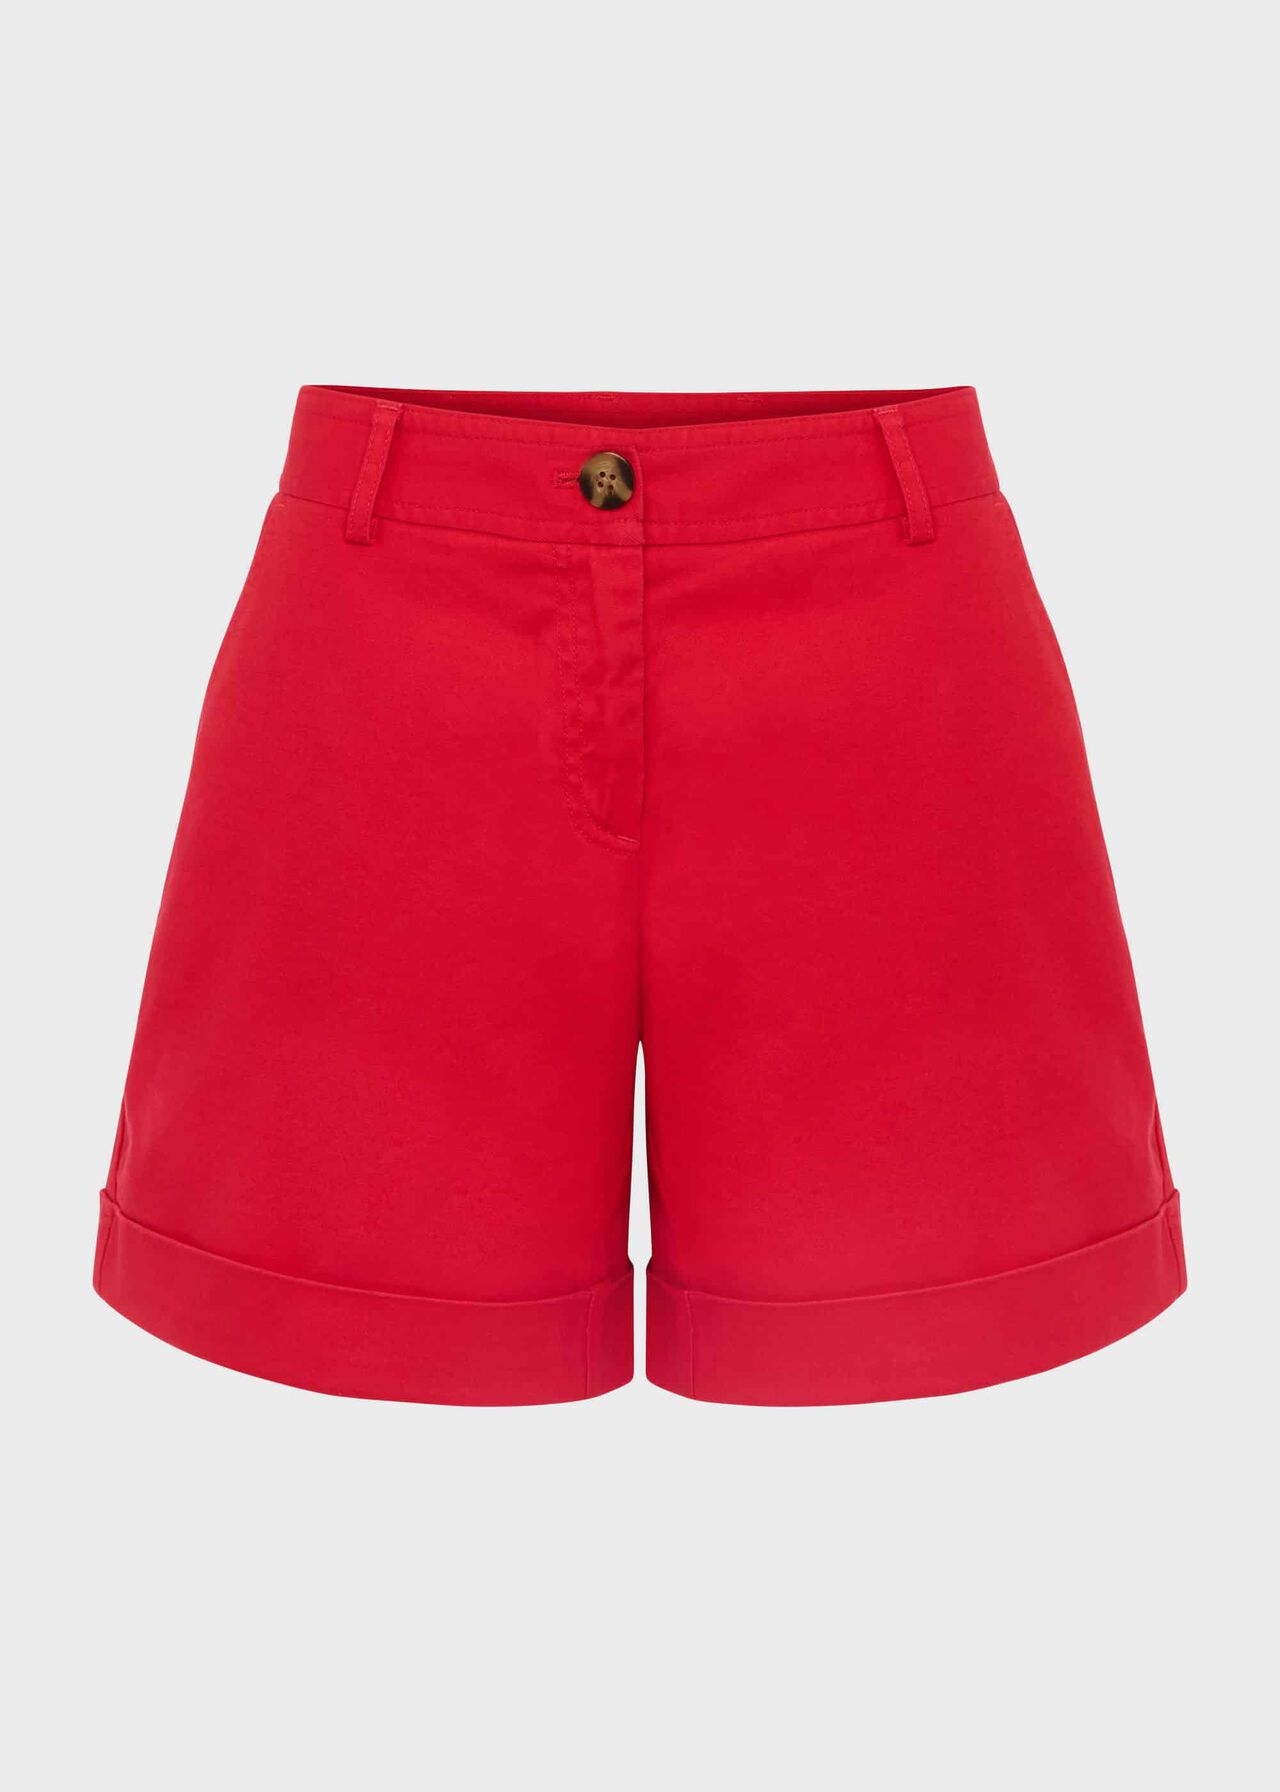 Chessie Shorts, Coral Red, hi-res